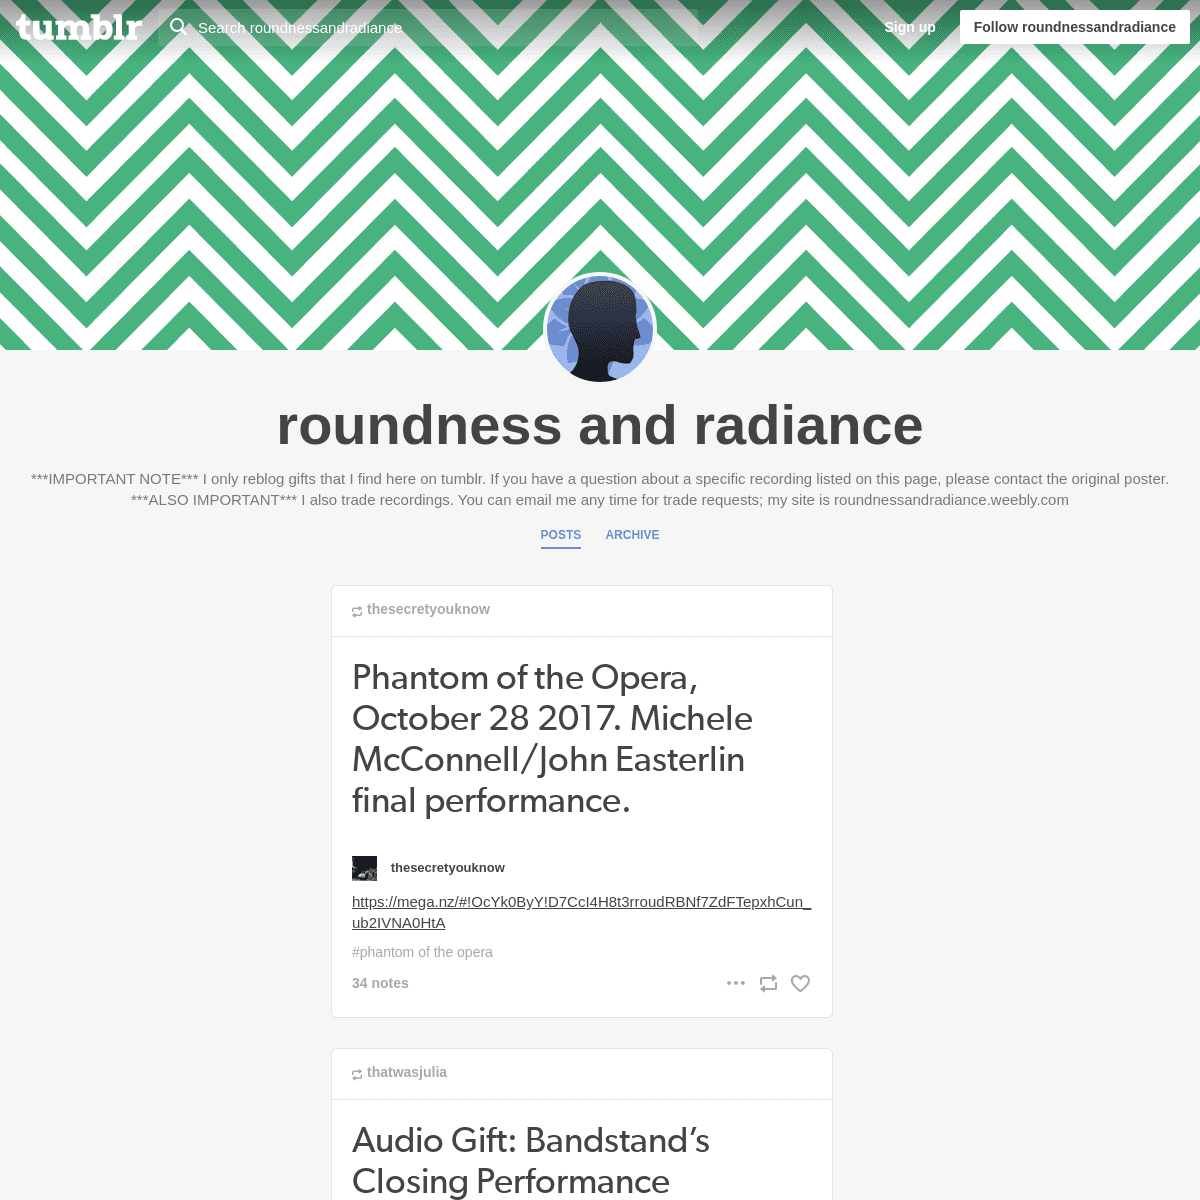 A complete backup of roundnessandradiance.tumblr.com